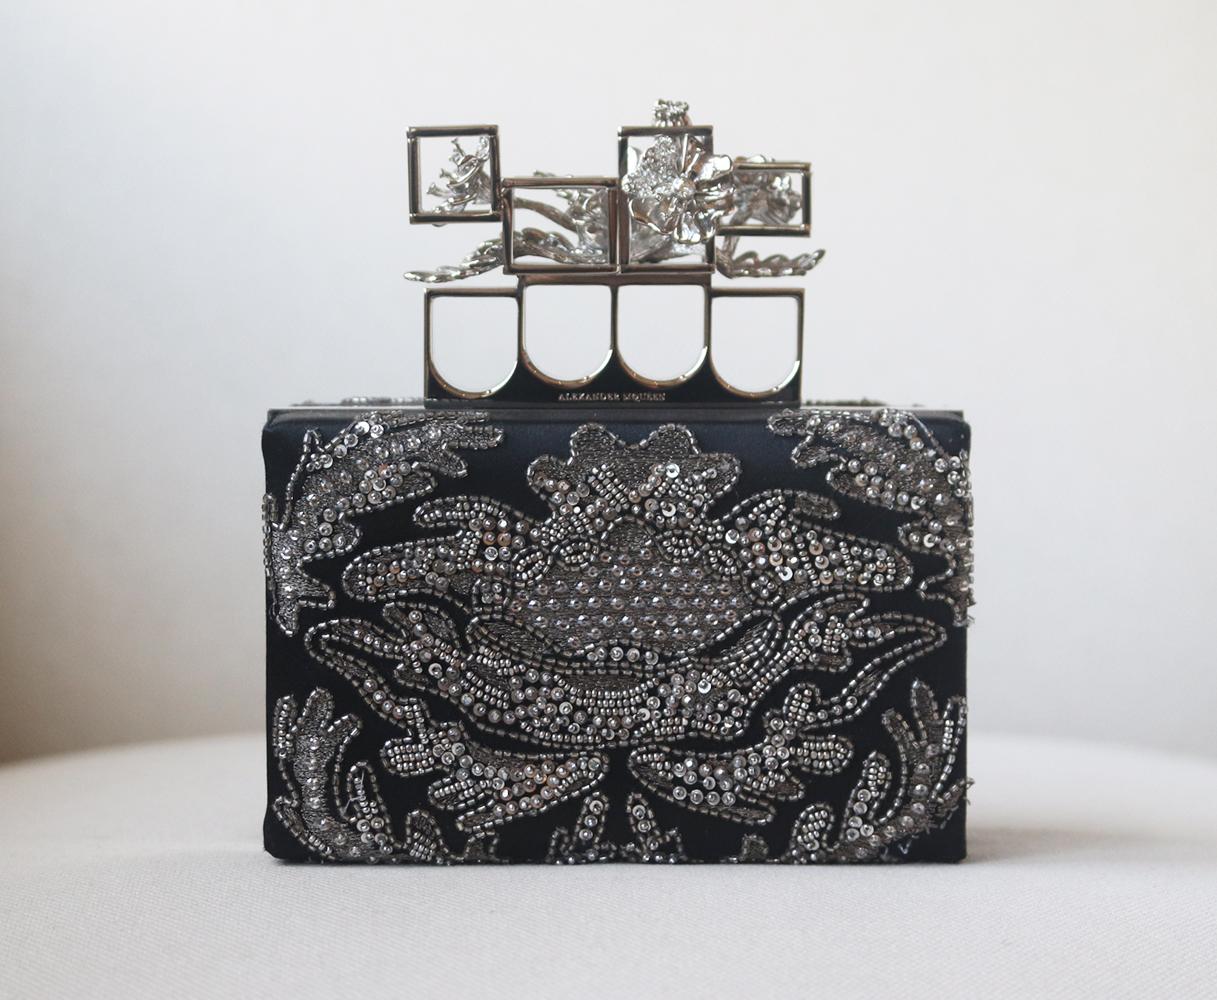 Made in Italy, Alexander McQueen's black satin box clutch is lavishly embellished with gunmetal embroidery, sequins, beads and Swarovski crystals, the polished silver-tone brass knuckle clasp is strikingly detailed with caged poppies.
Black satin